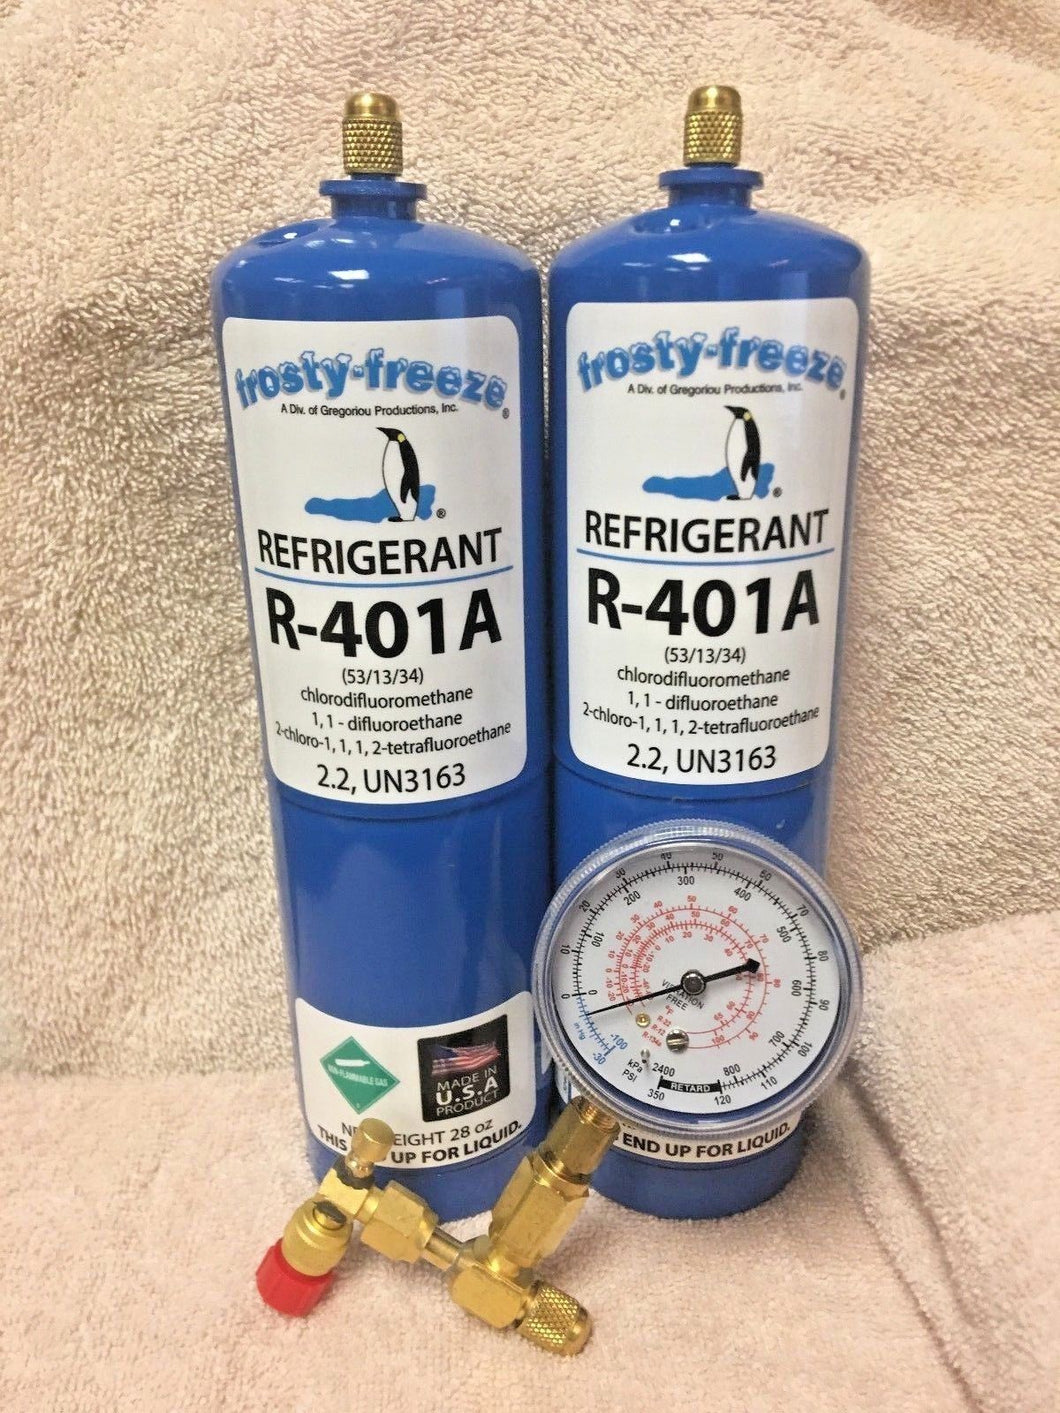 MP39, R401a, Refrigerant Coolers, Freezers, (2) Two, 28 oz Disposable Cans MP-39